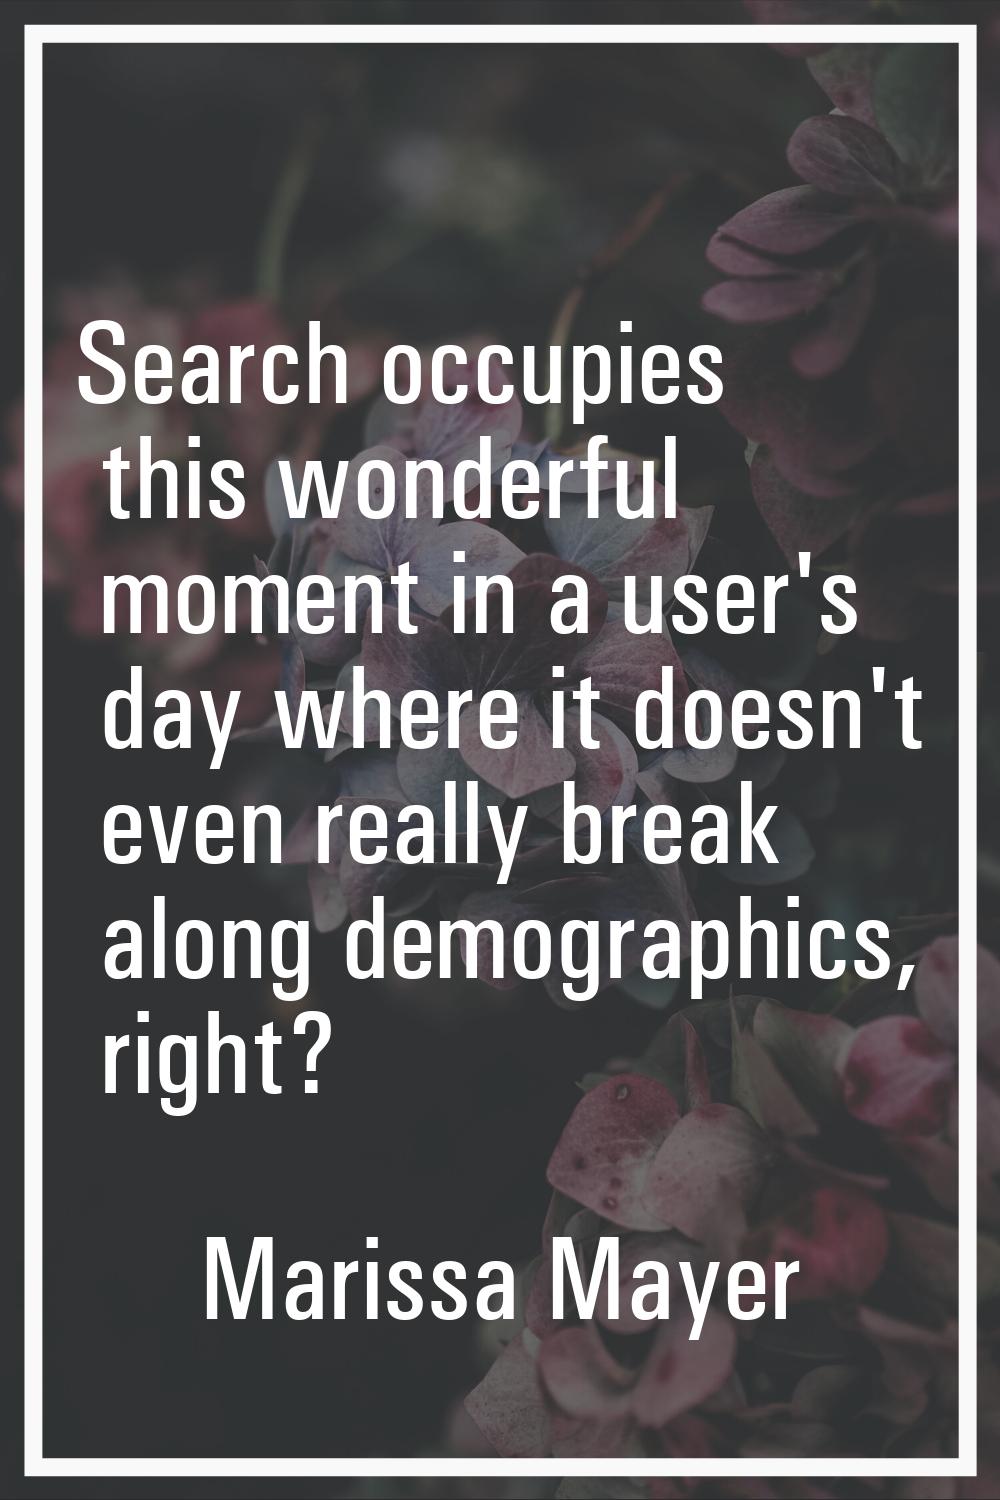 Search occupies this wonderful moment in a user's day where it doesn't even really break along demo